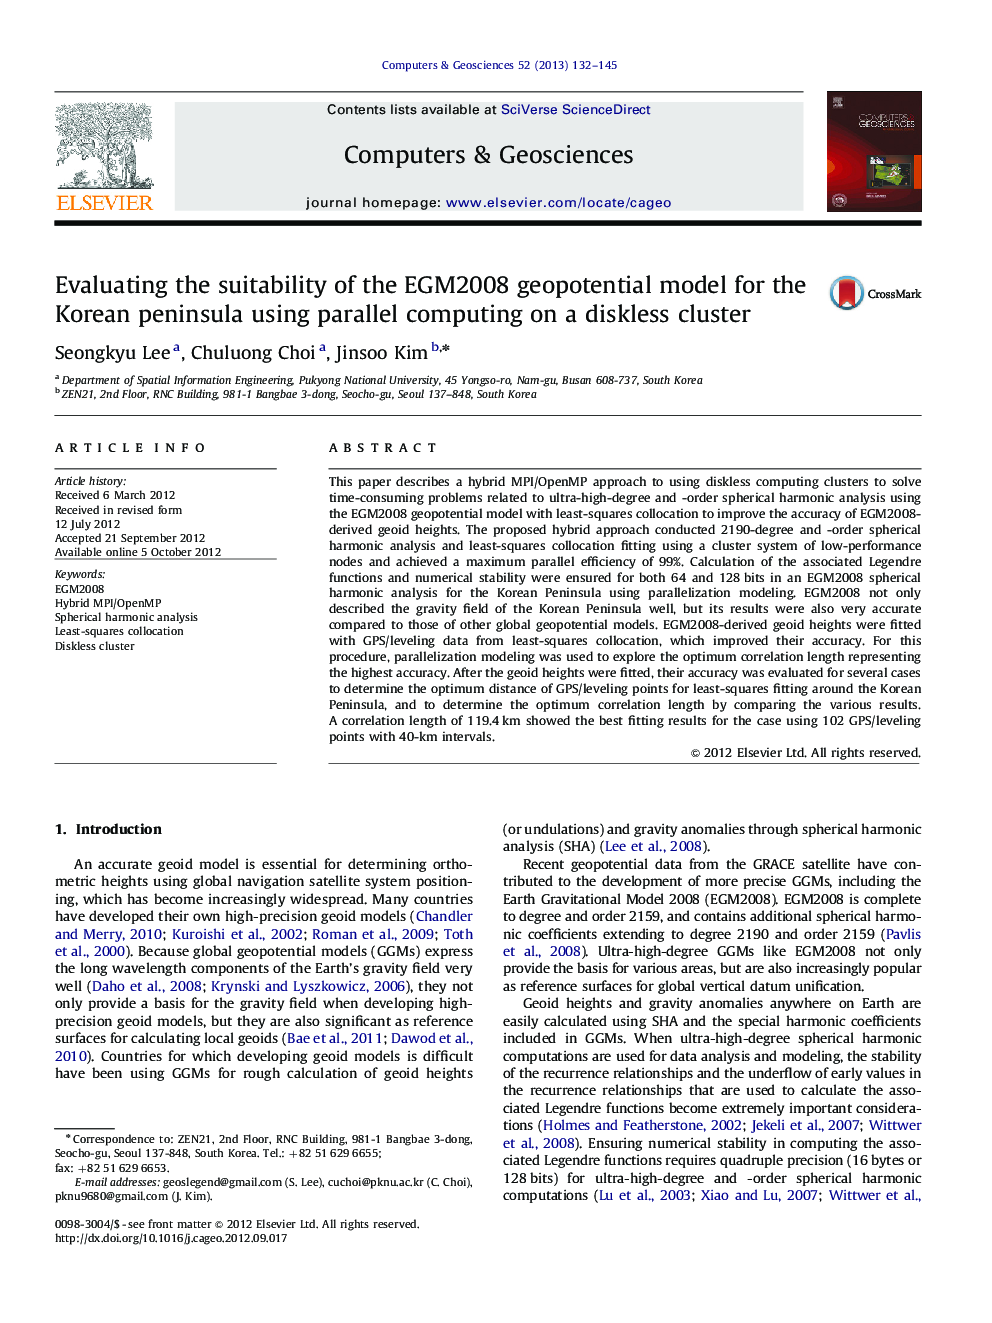 Evaluating the suitability of the EGM2008 geopotential model for the Korean peninsula using parallel computing on a diskless cluster